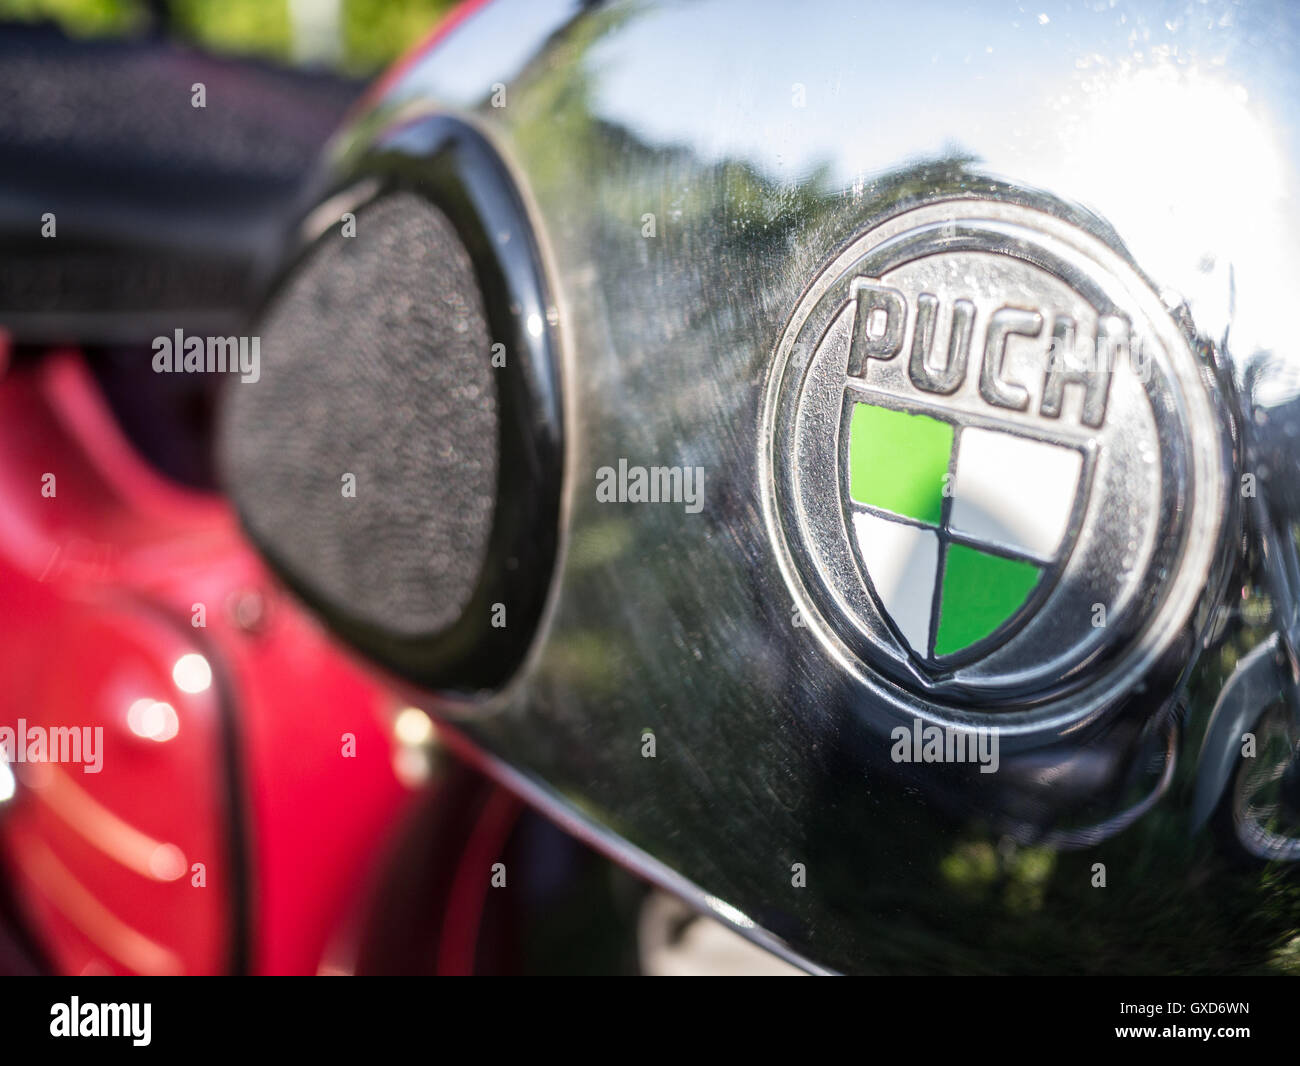 A Puch logo Stock Photo